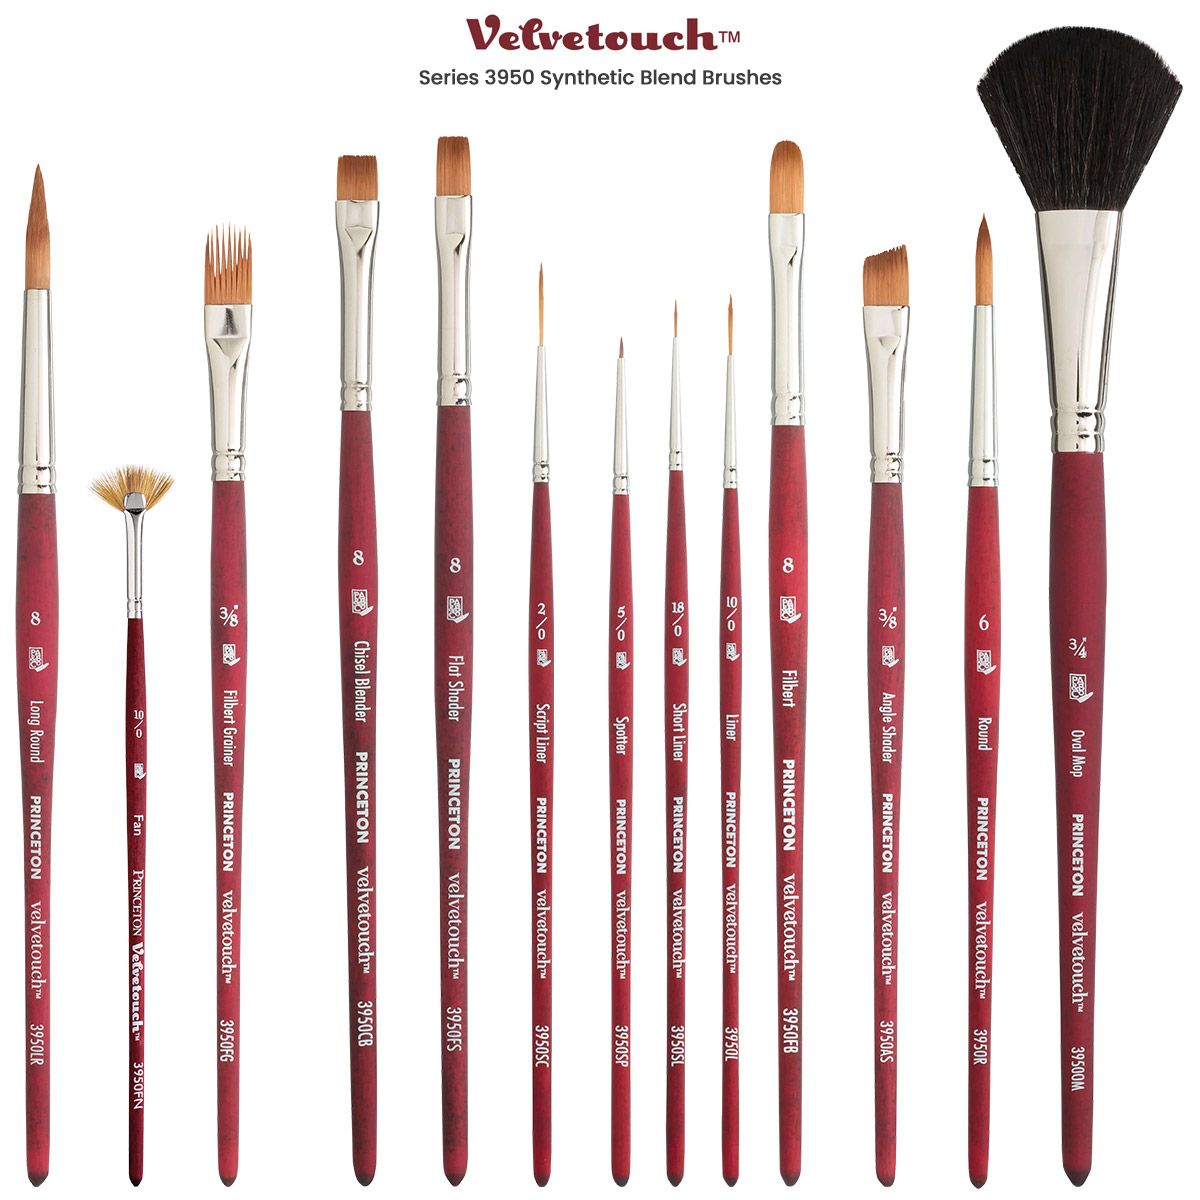 Princeton Velvetouch™ Series 3950 Synthetic Blend